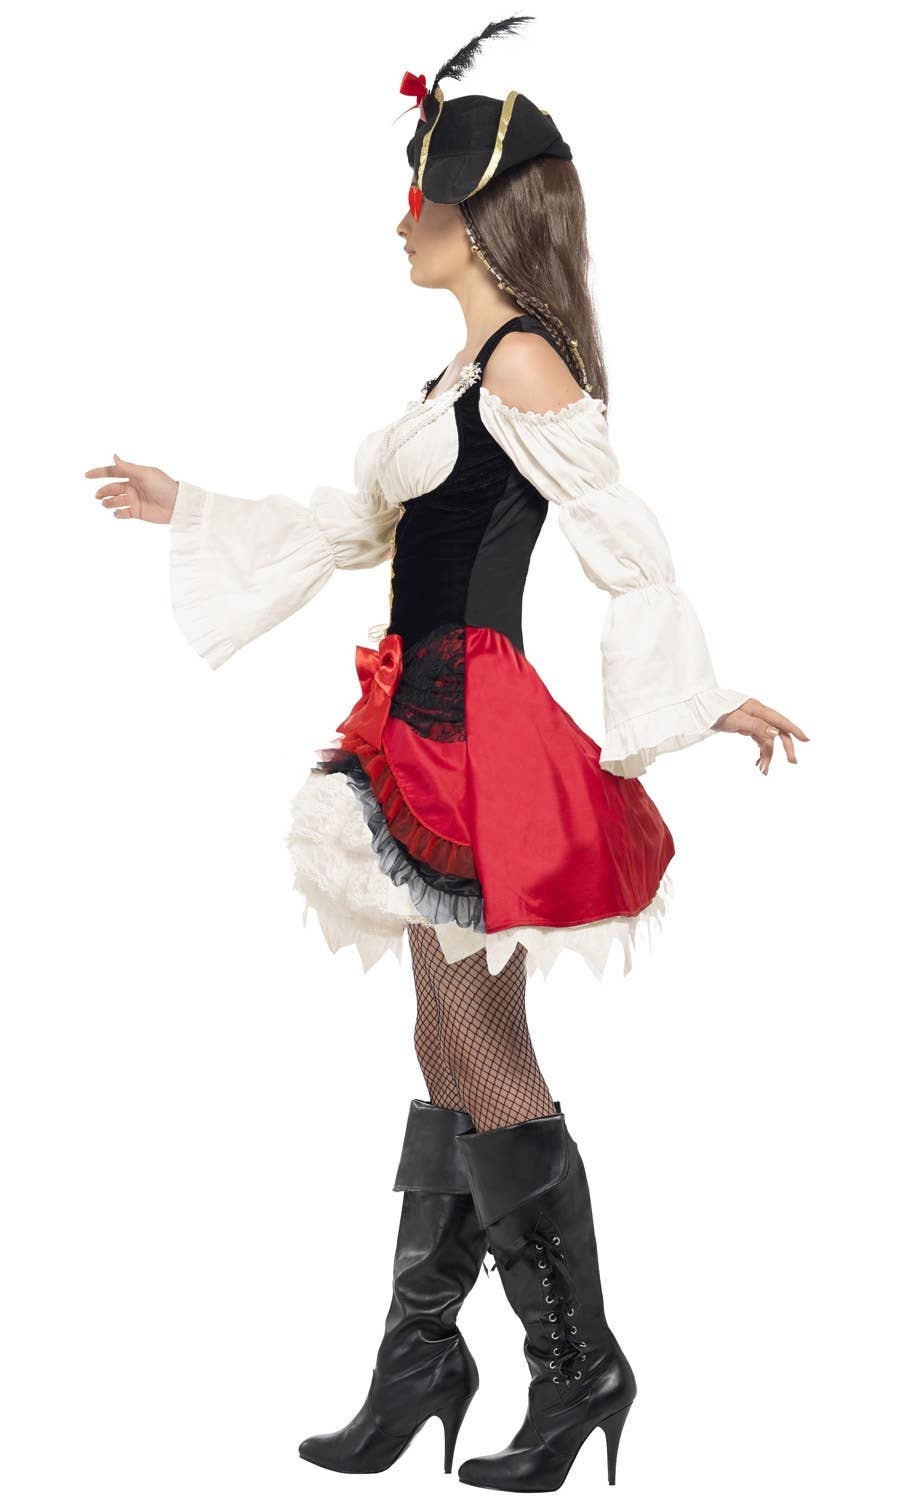 Glamorous Women's Black and Red Pirate Lady Costume Side View